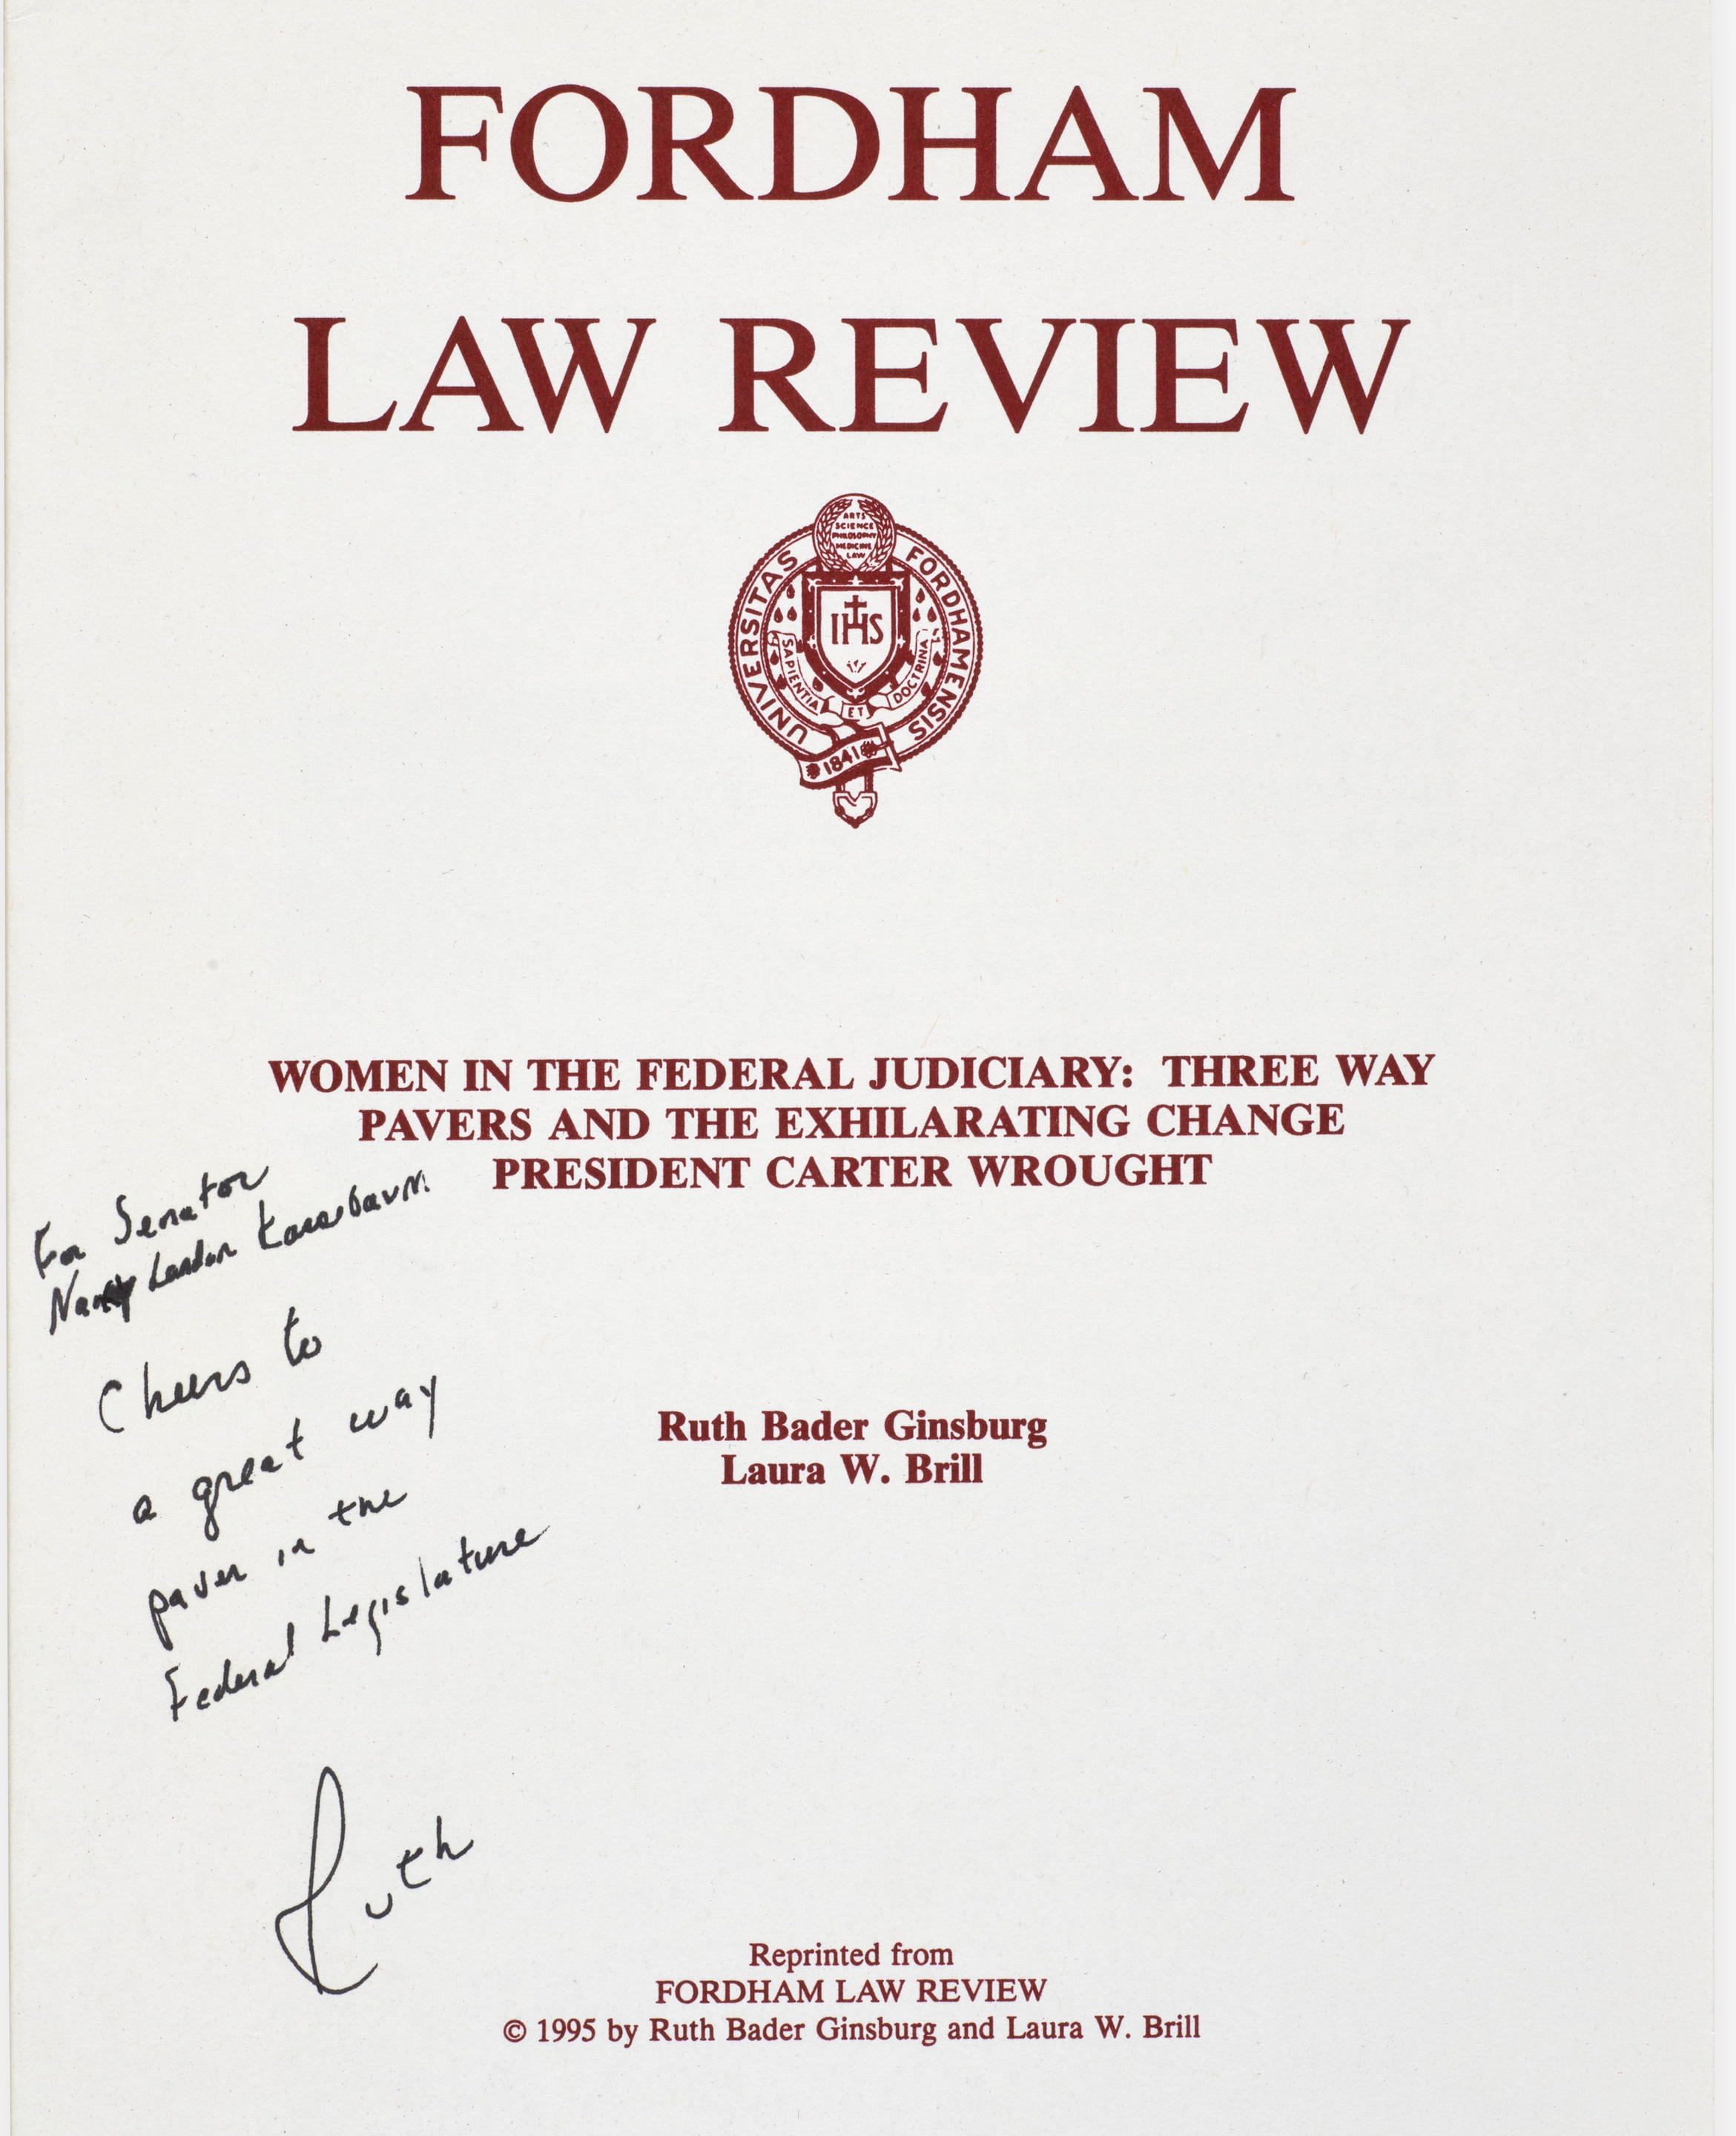 LAW REVIEW OFFPRINT SIGNED AND INSCRIBED BY RUTH BADER GINSBURG. "Women in the Federal Judiciary: Three Way Pavers and the Exhilarating Change President Carter Wrought." Offprint from Fordham Law Review, Vol 64 (1995): 2.